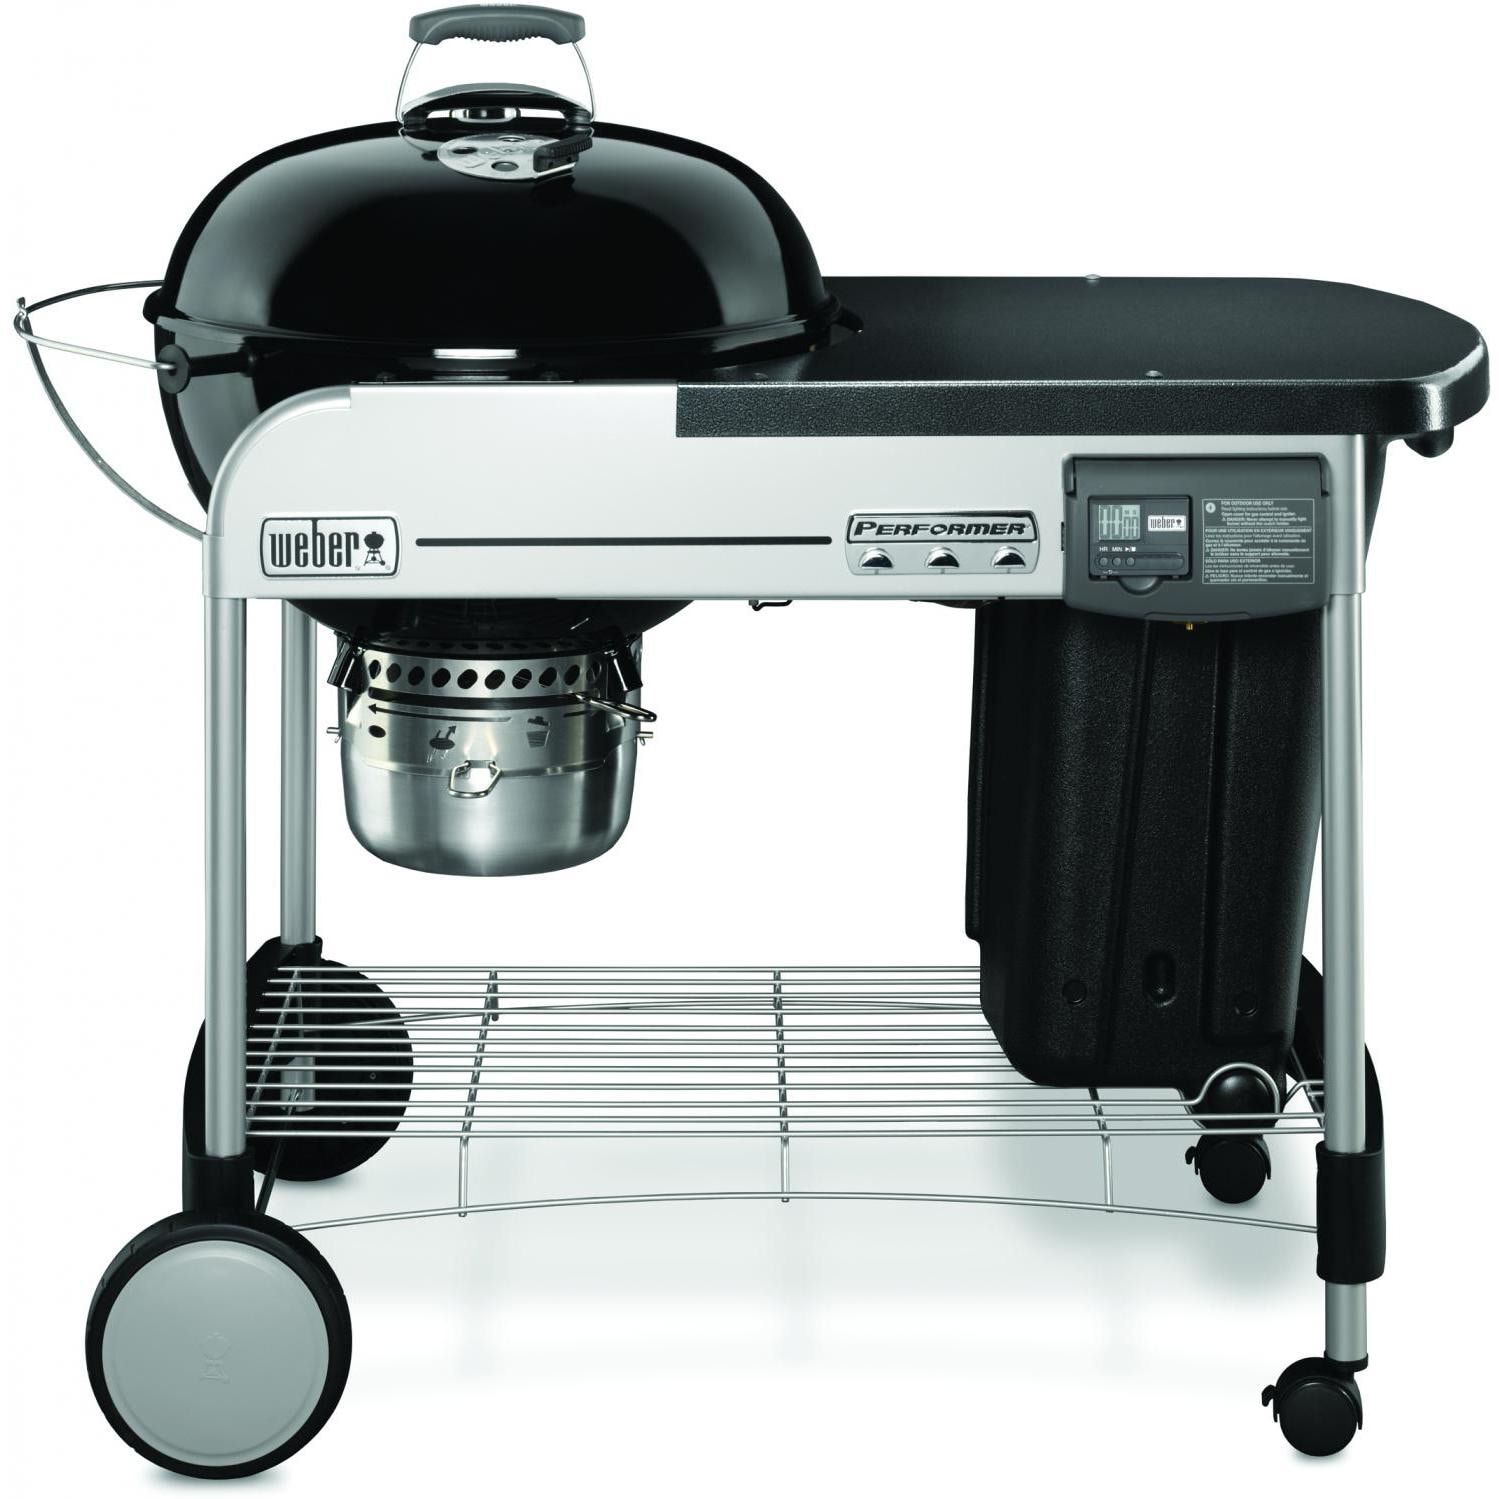 Weber Performer Deluxe 22-Inch Freestanding Charcoal Grill With Touch-N-Go Ignition - Black - 15501001 - image 1 of 7